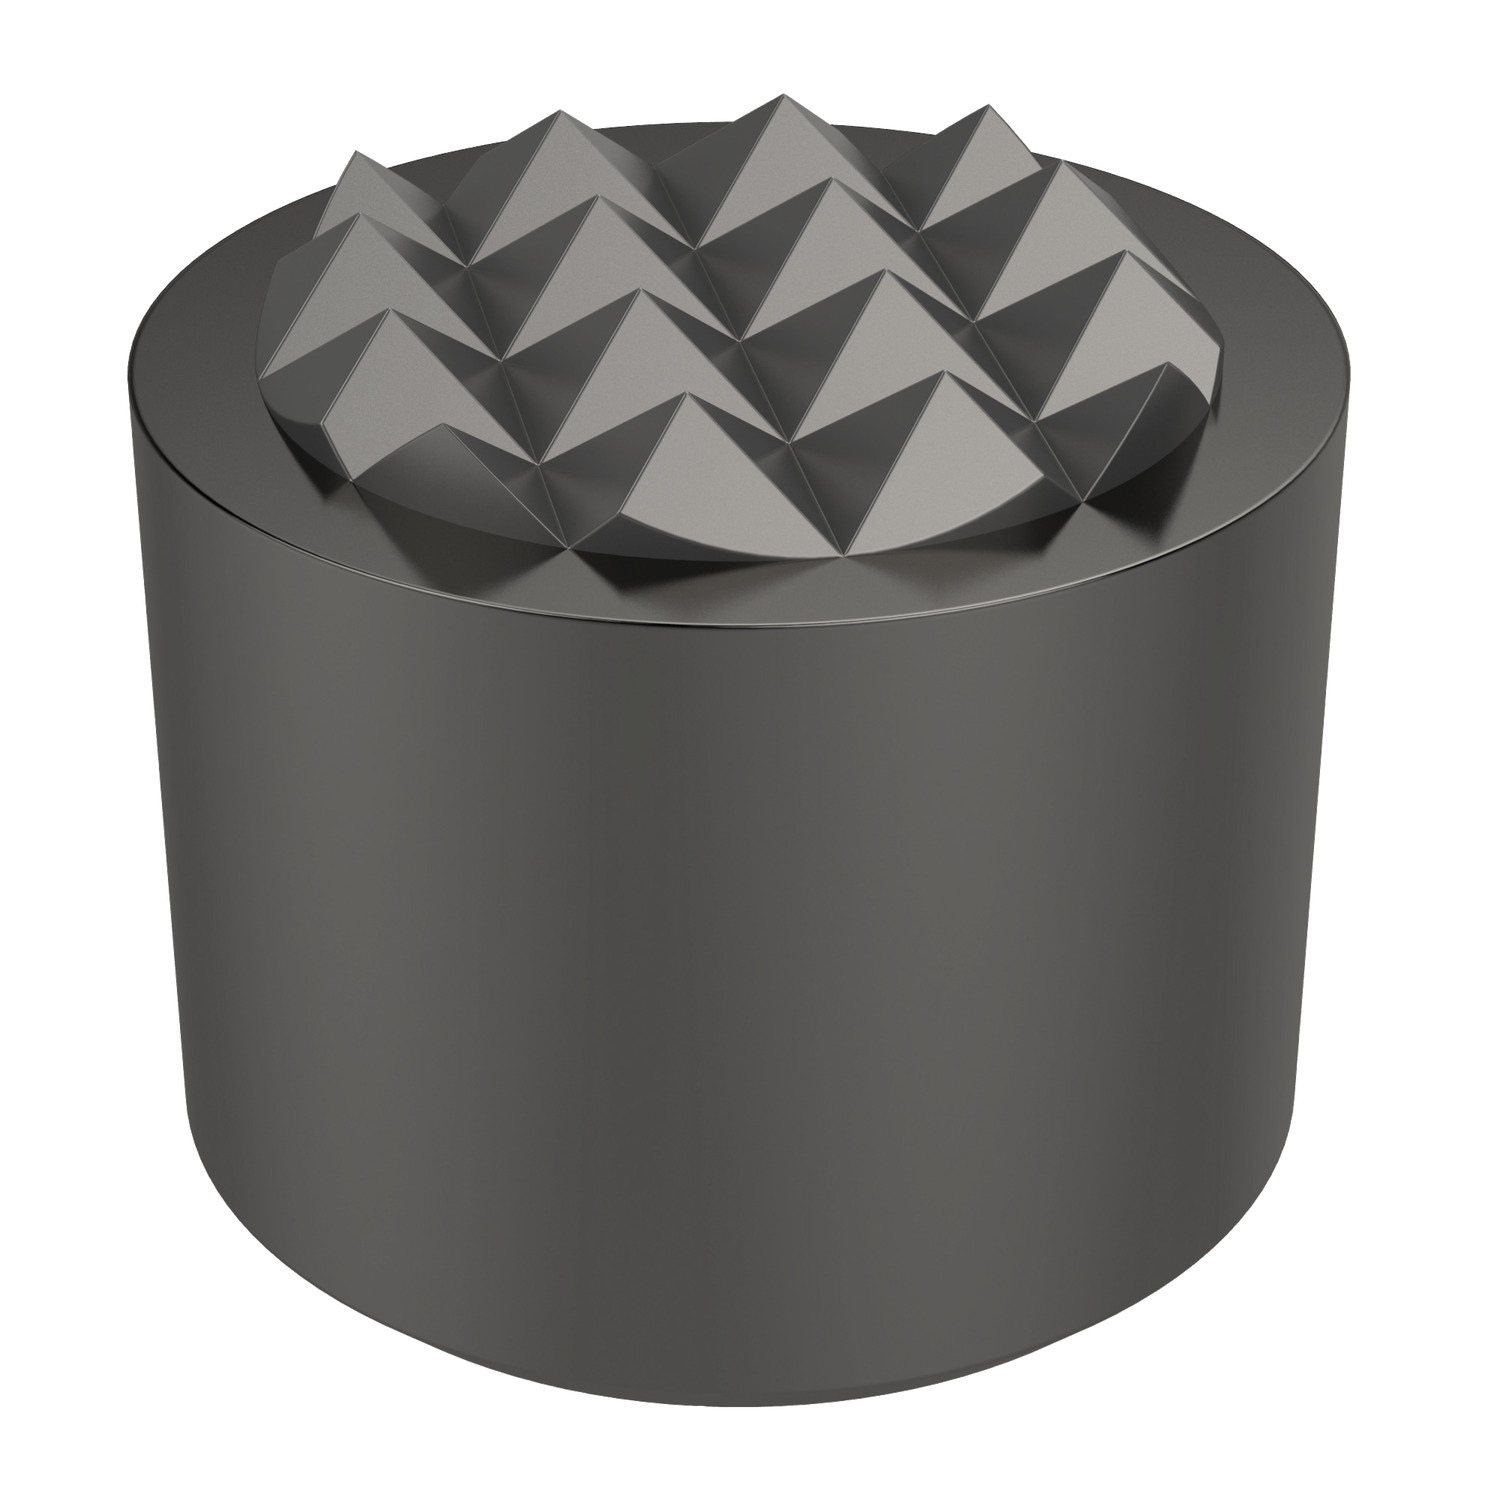 Grippers - Carbide Tipped Constructed with high impact carbide pad brazed to a heat treated alloy steel body. Mount via tapped hole or a flat on the outside diameter for set screw mounting.